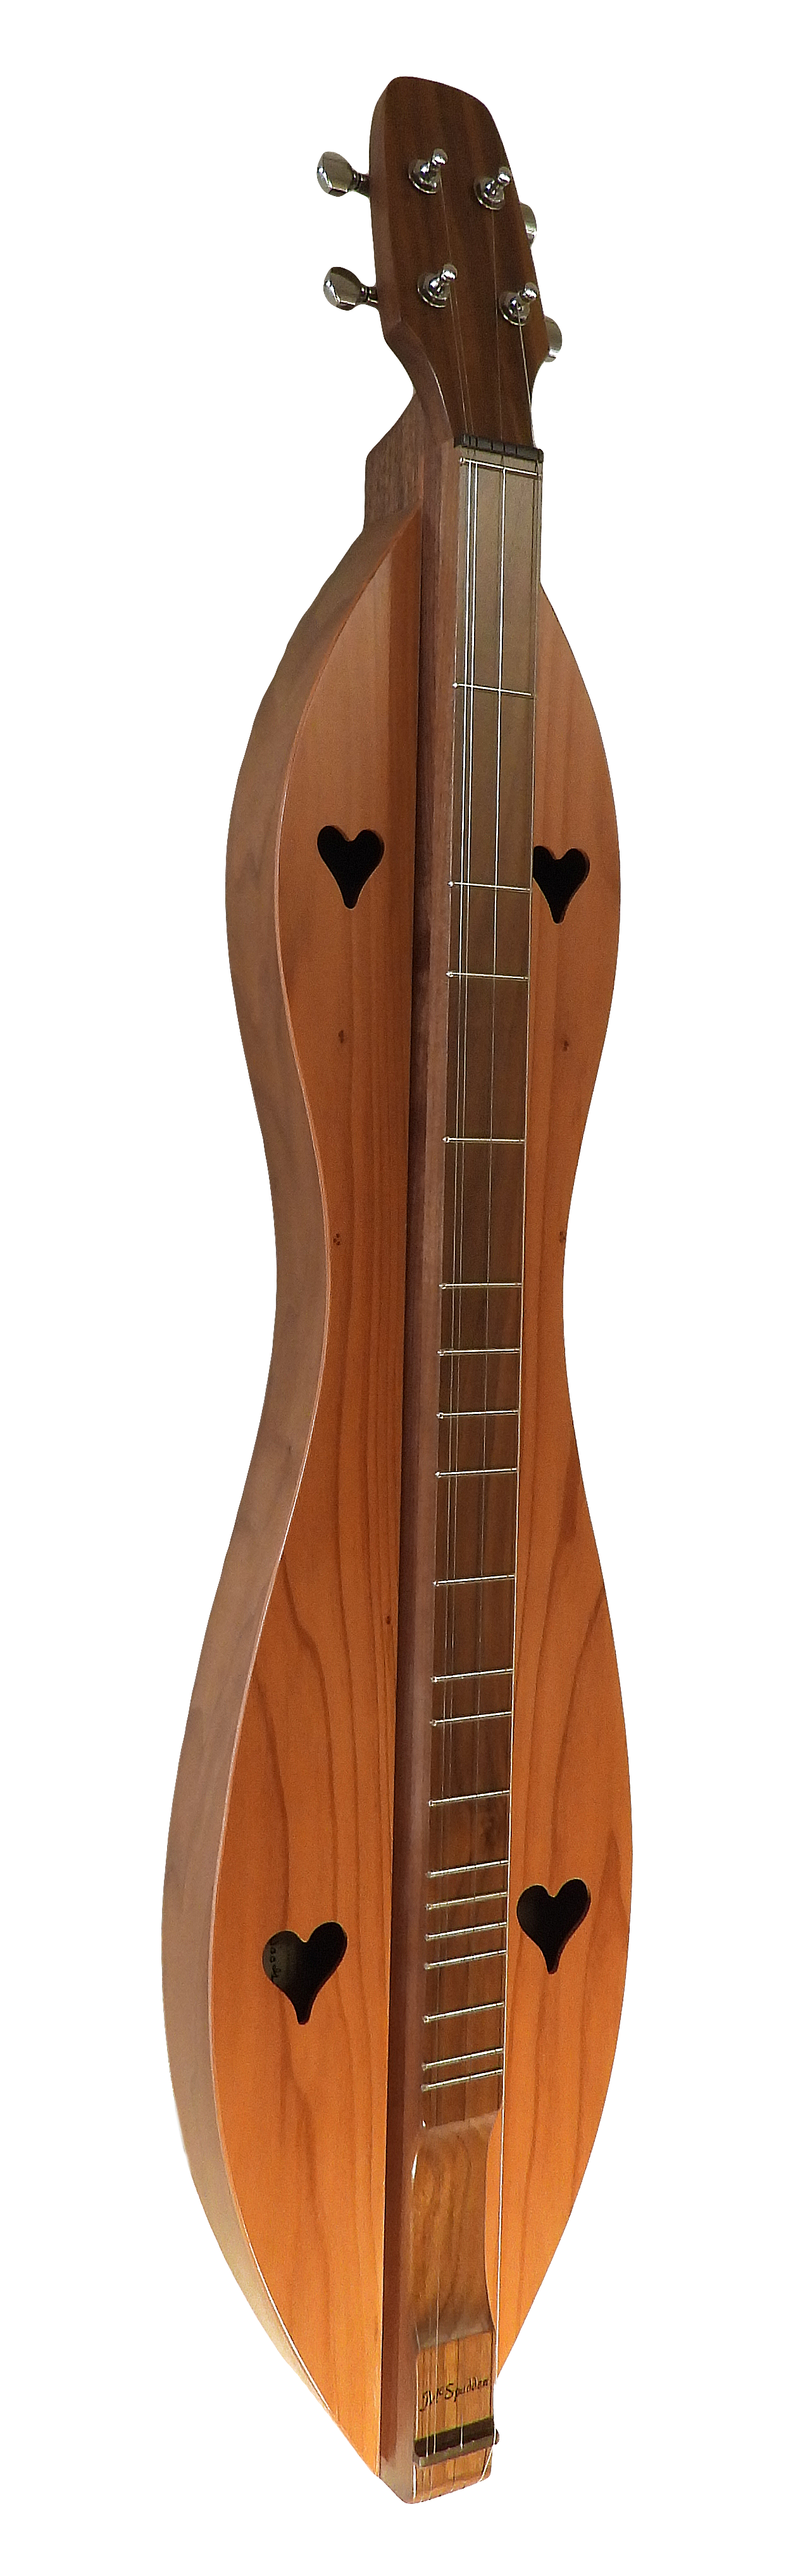 An acoustic 4 String, Flathead, Hourglass guitar with a Walnut back and Redwood Top, featuring a padded Navy nylon case for added protection (4FHWR).